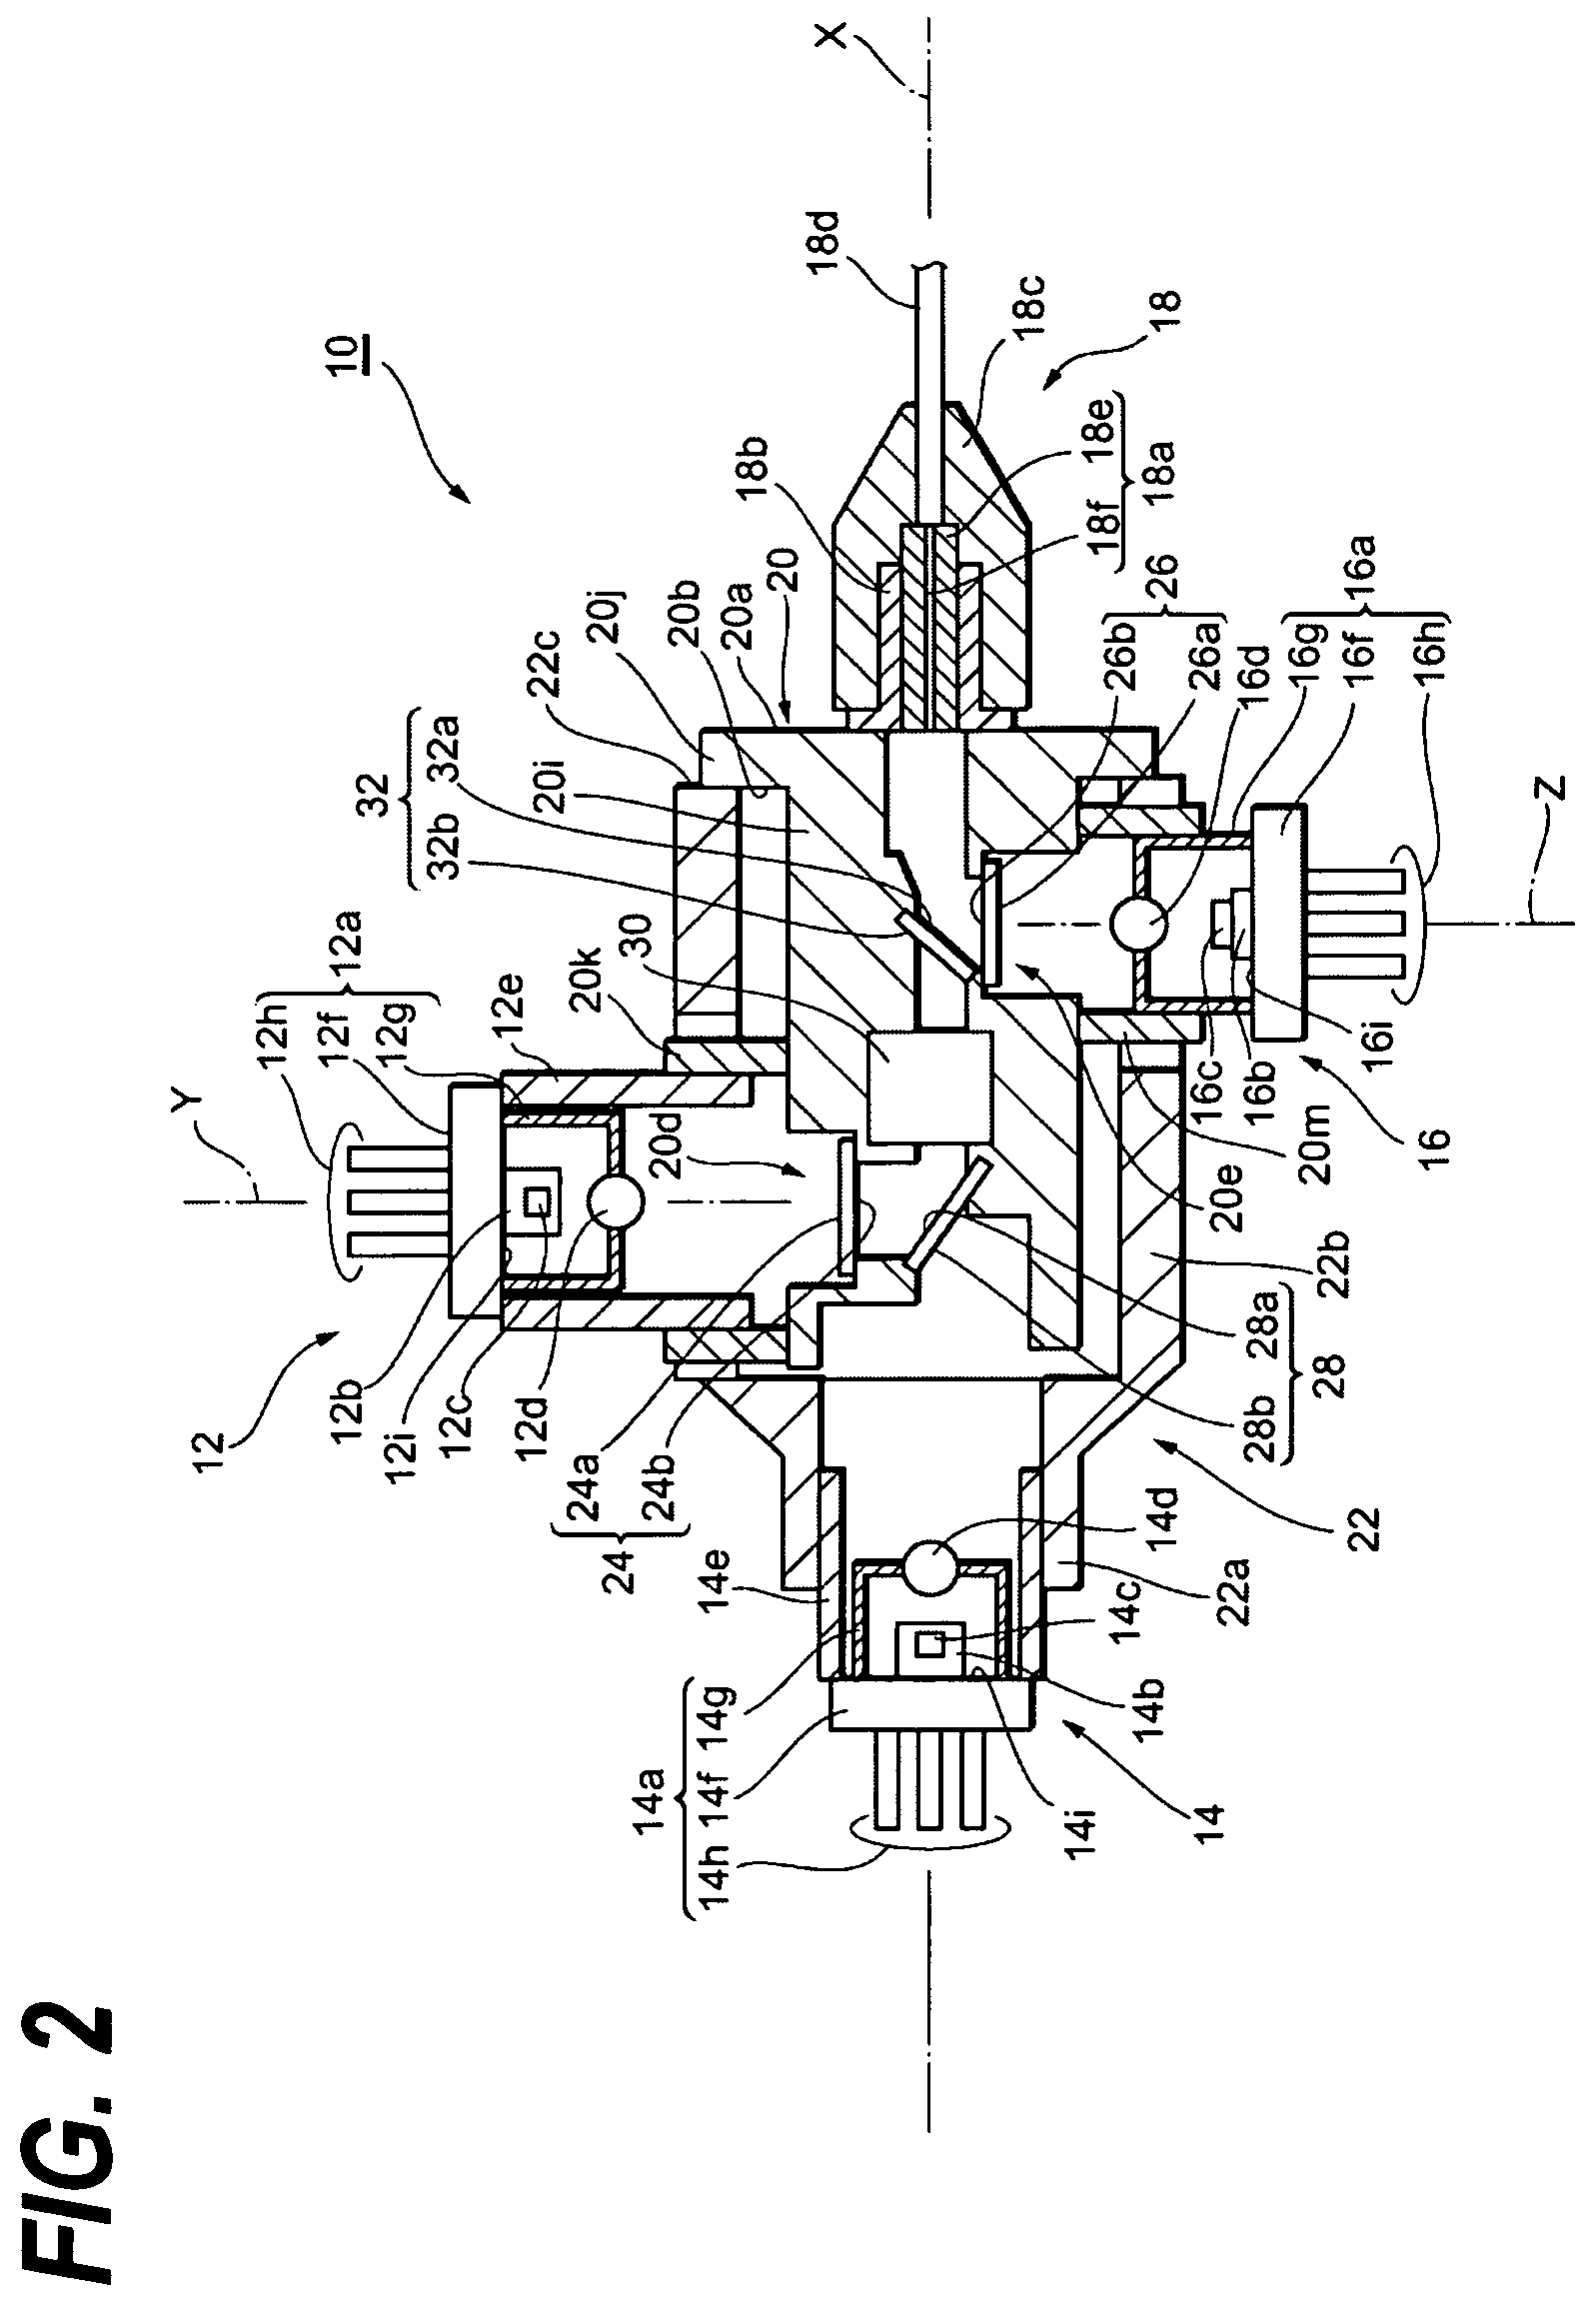 Bidirectional optical assembly and method for manufacturing the same